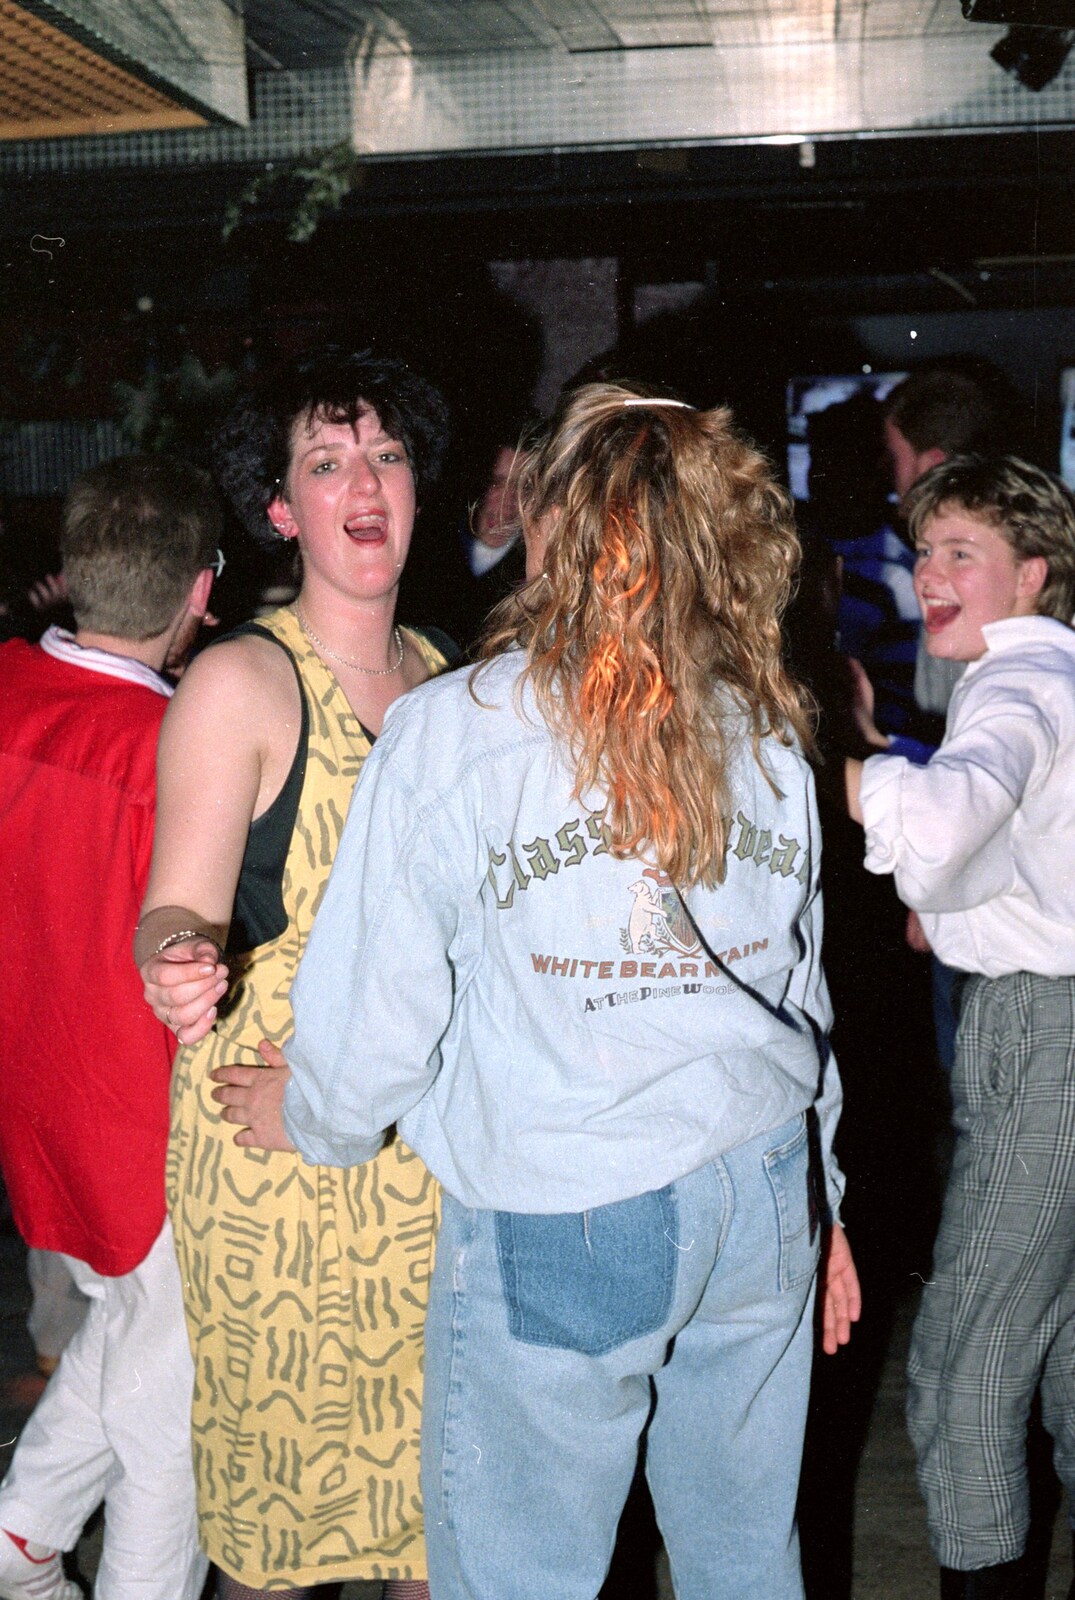 It's crowded on the dancefloor from Uni: A Party in Snobs Nightclub, Mayflower Street, Plymouth - 18th October 1986